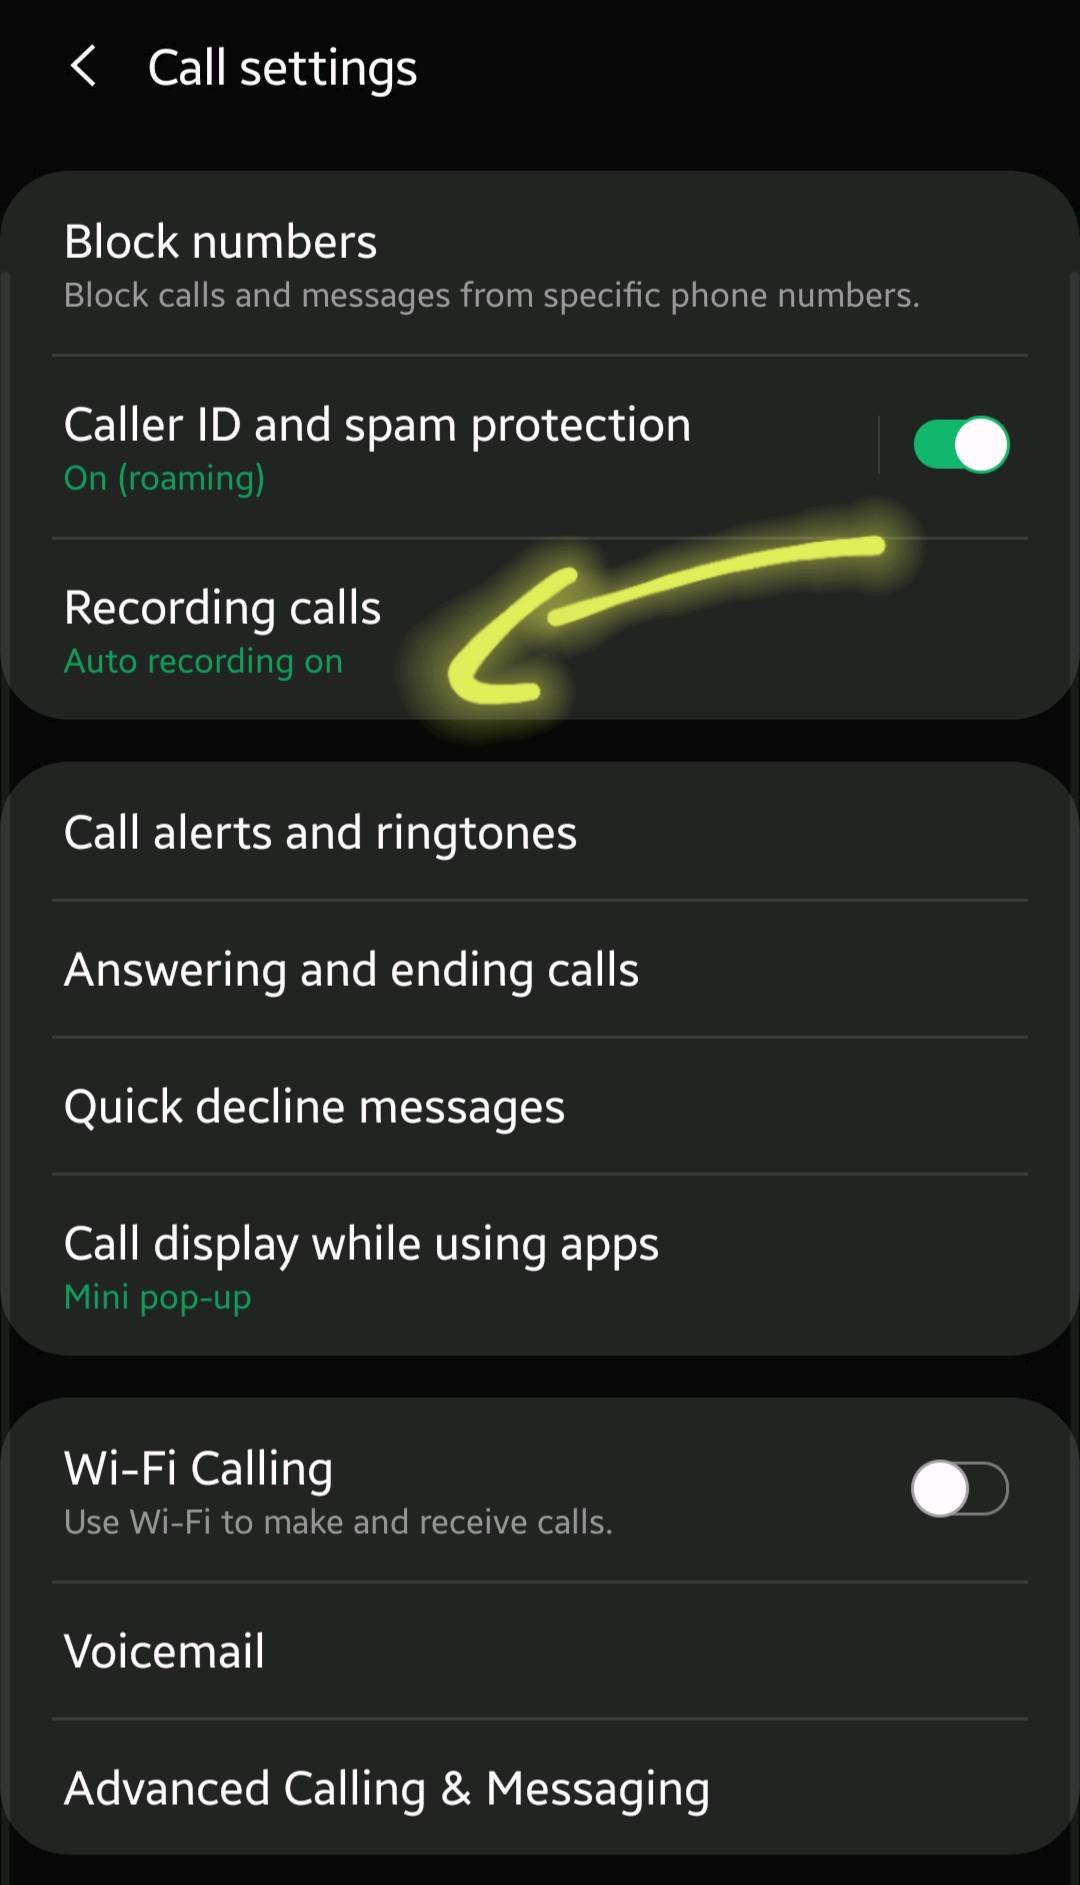 Solved: Samsung Auto call Recording - Samsung Members